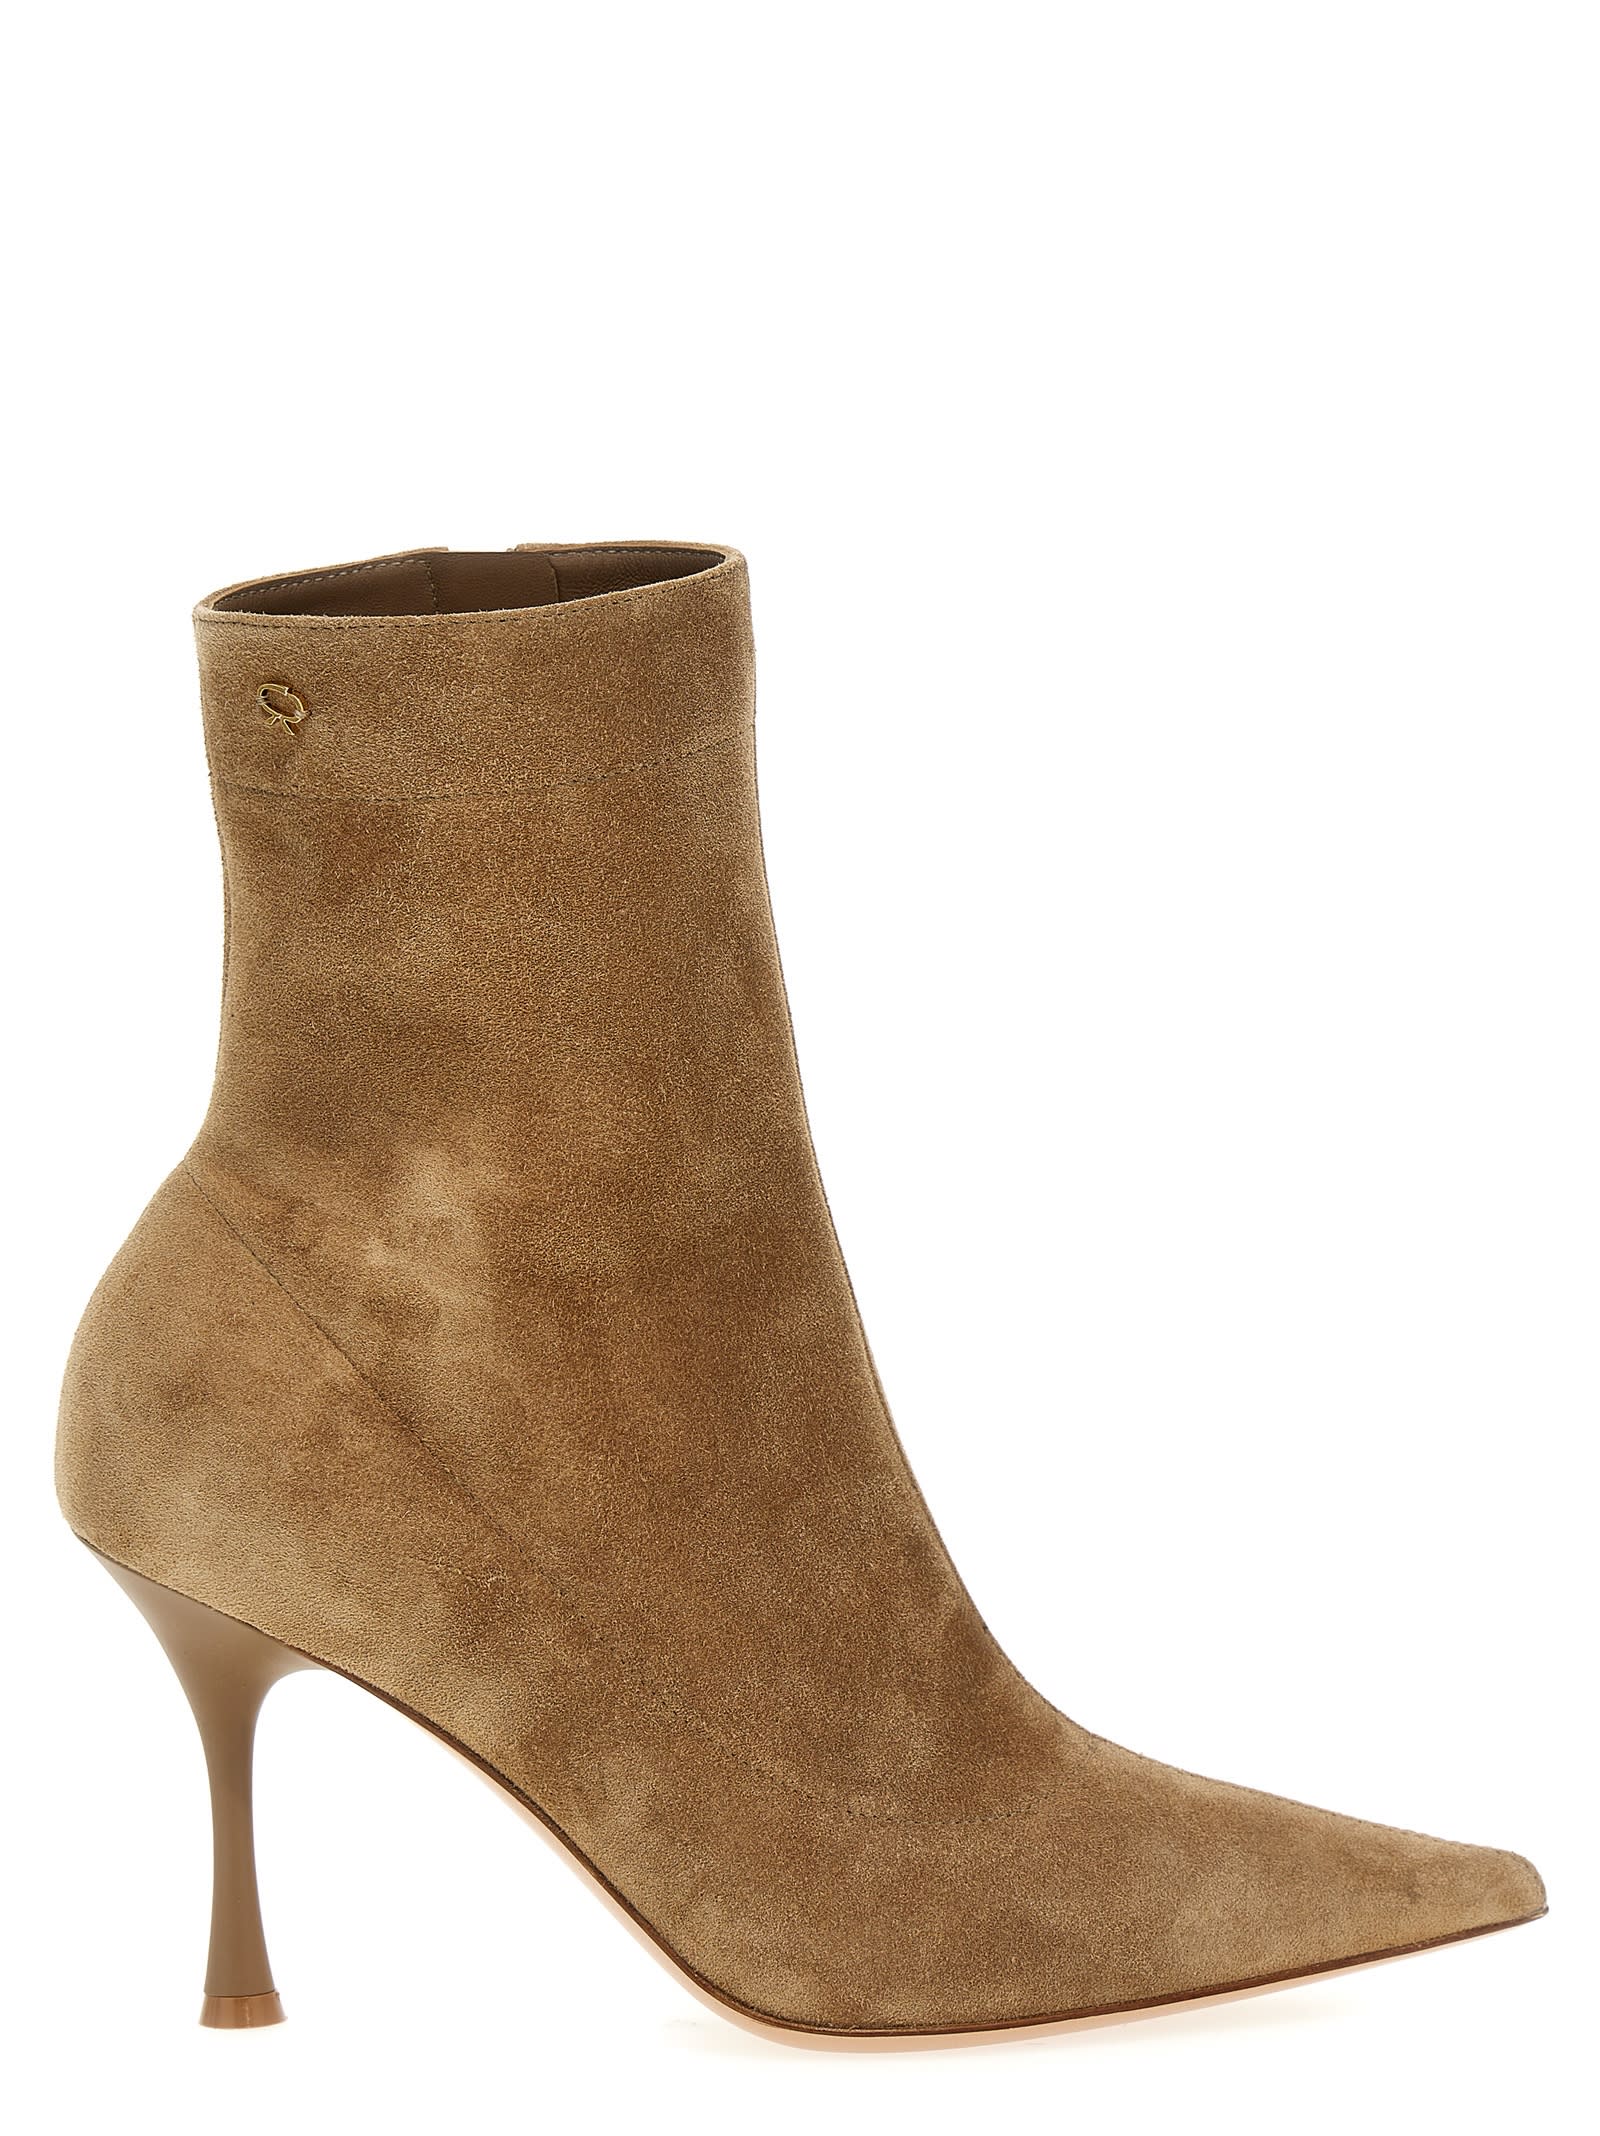 GIANVITO ROSSI DUNN ANKLE BOOTS